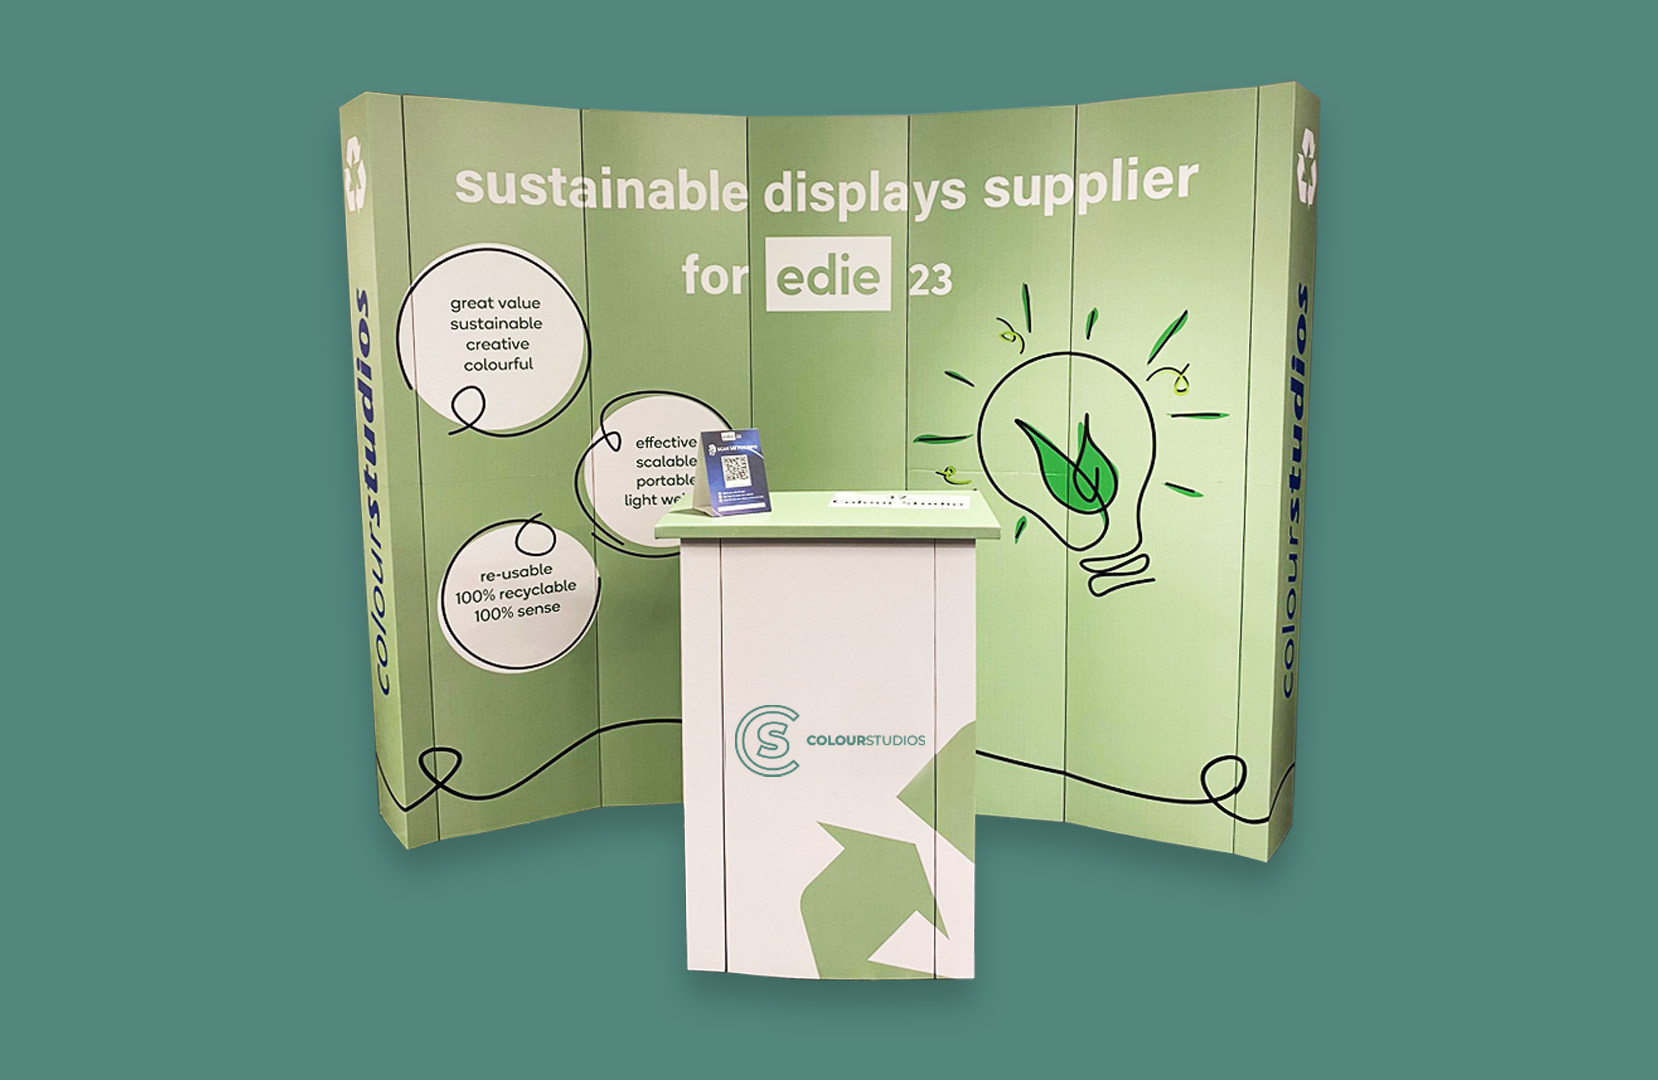 Recycable displays